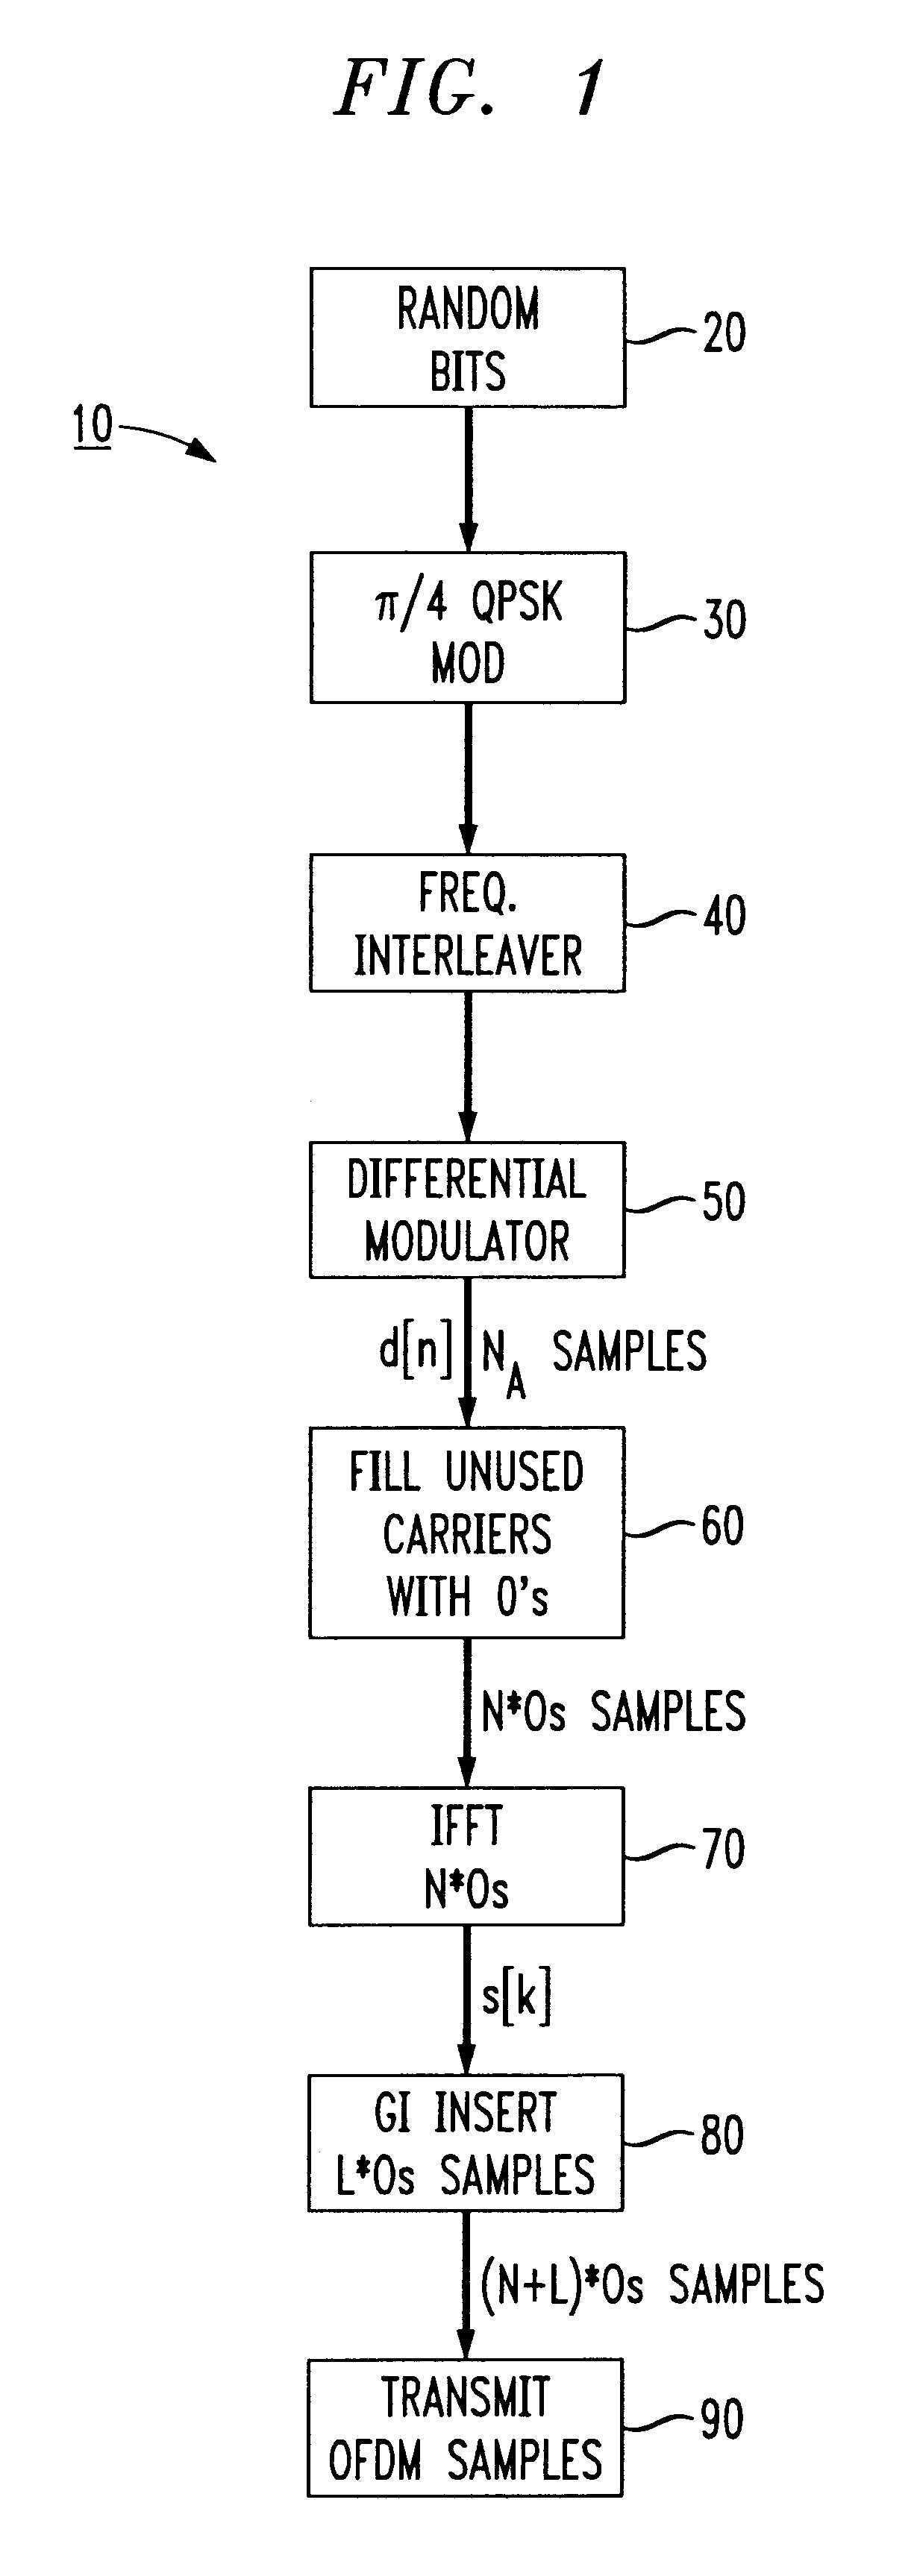 Methods of estimating signal-to-noise ratios